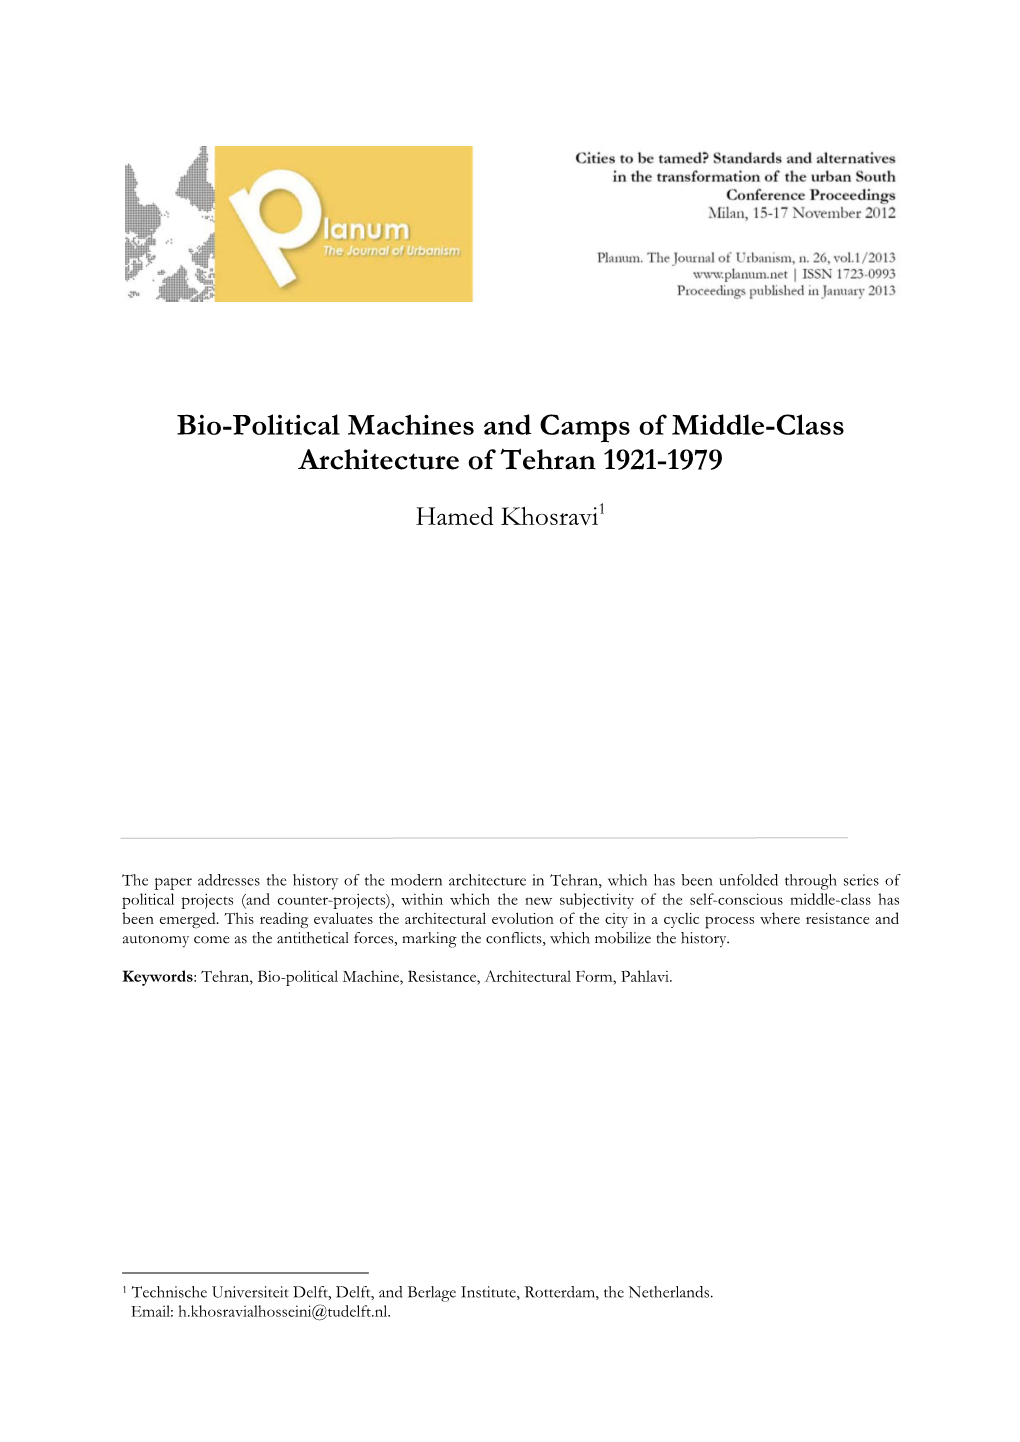 Bio-Political Machines and Camps of Middle-Class Architecture of Tehran 1921-1979